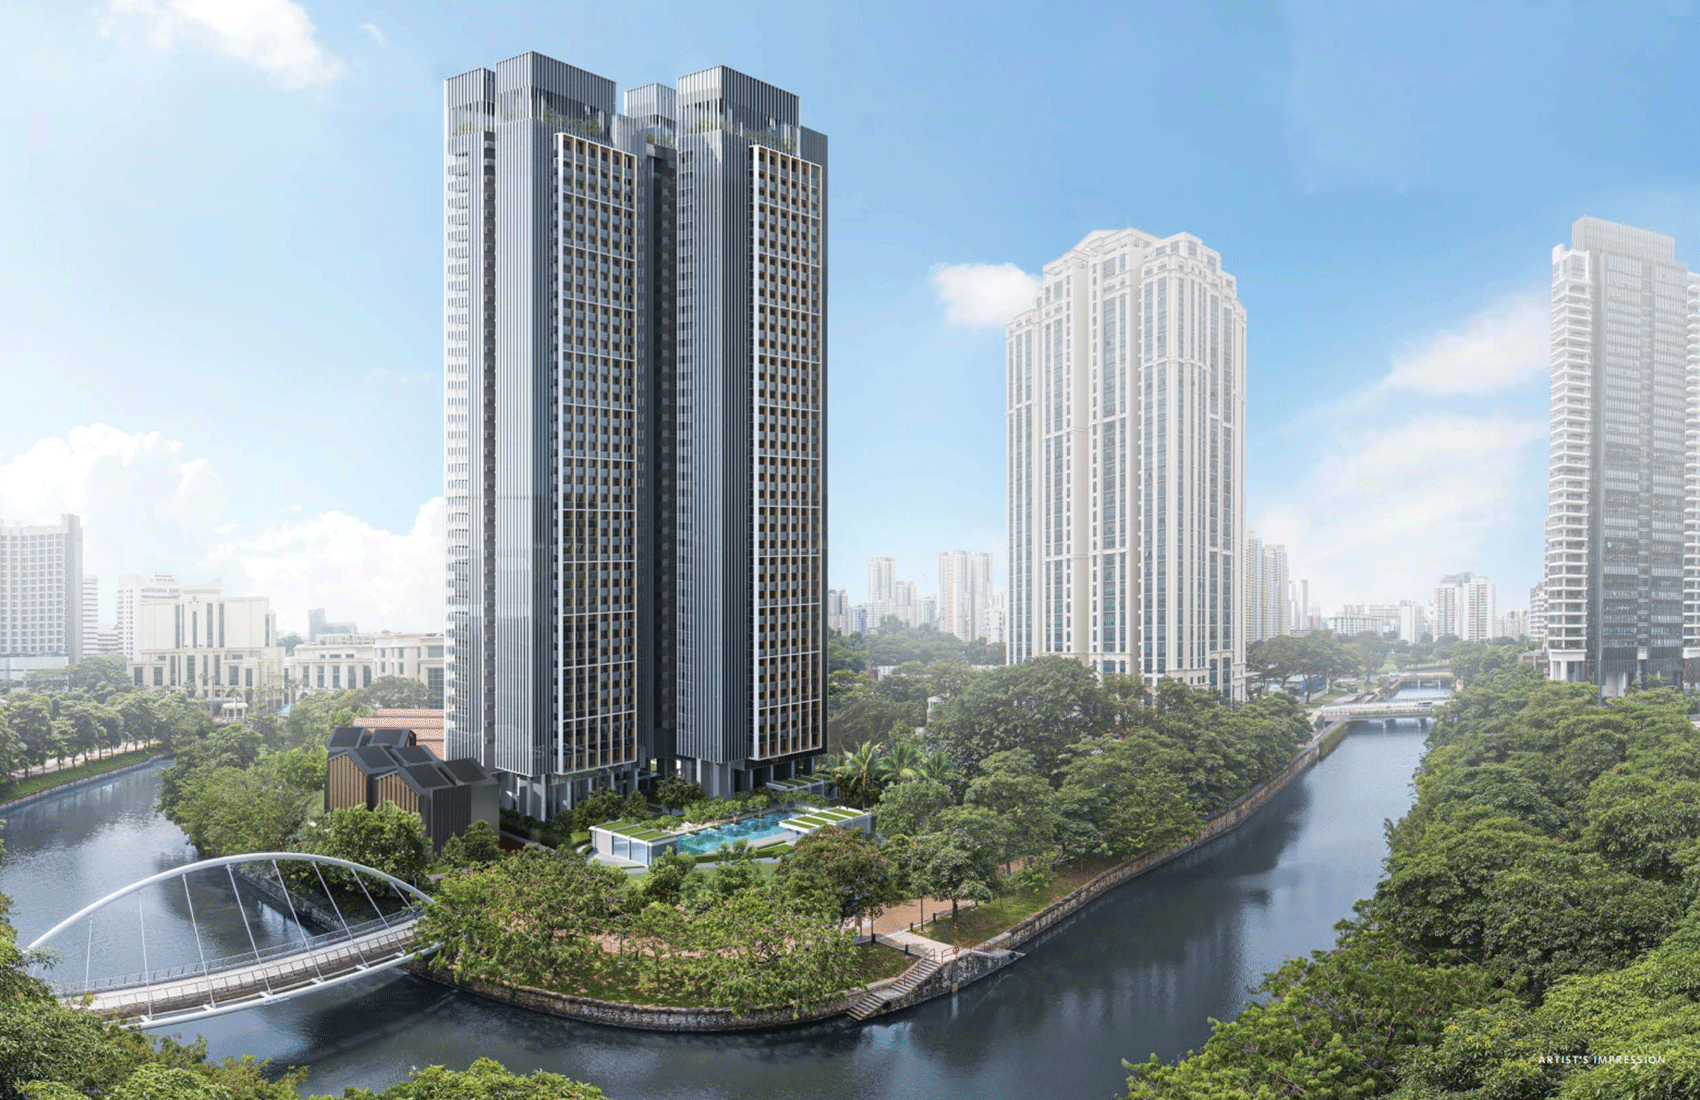 Riviere - new condo for sales developed by Frasers Property Singapore